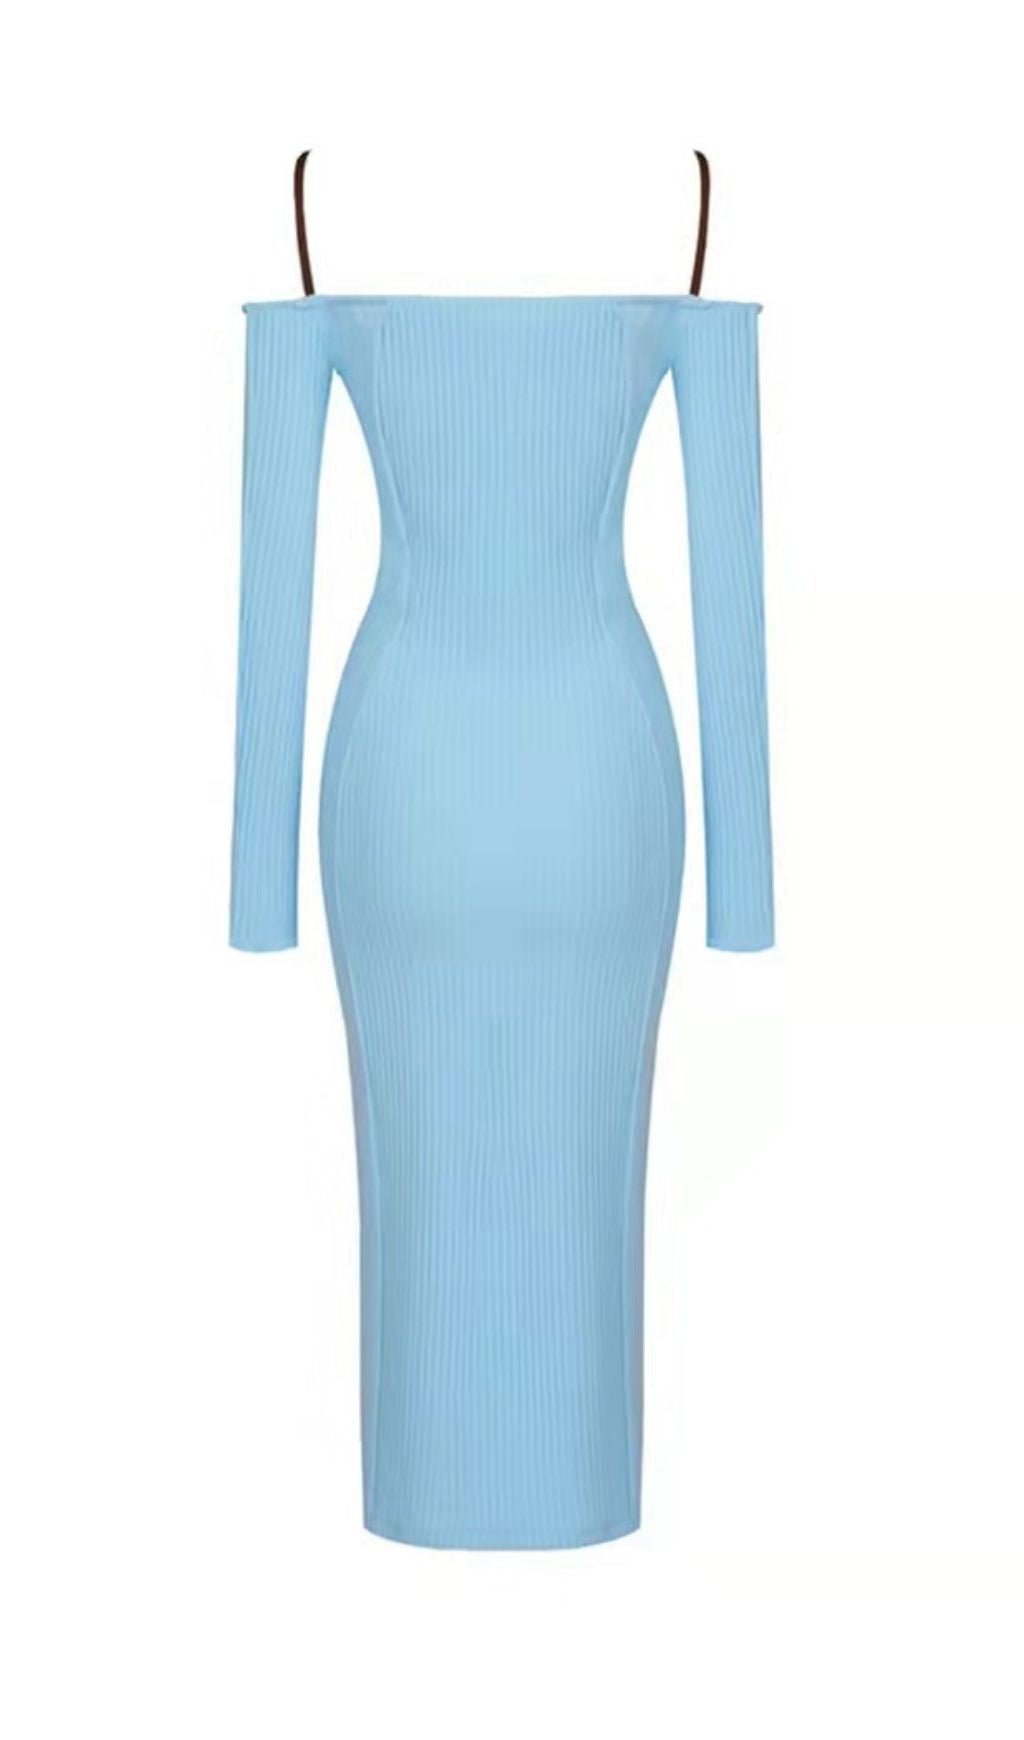 STRAPPY HOLLOW STRAPLESS BANDAGE MINI DRESS IN SKY BLUE